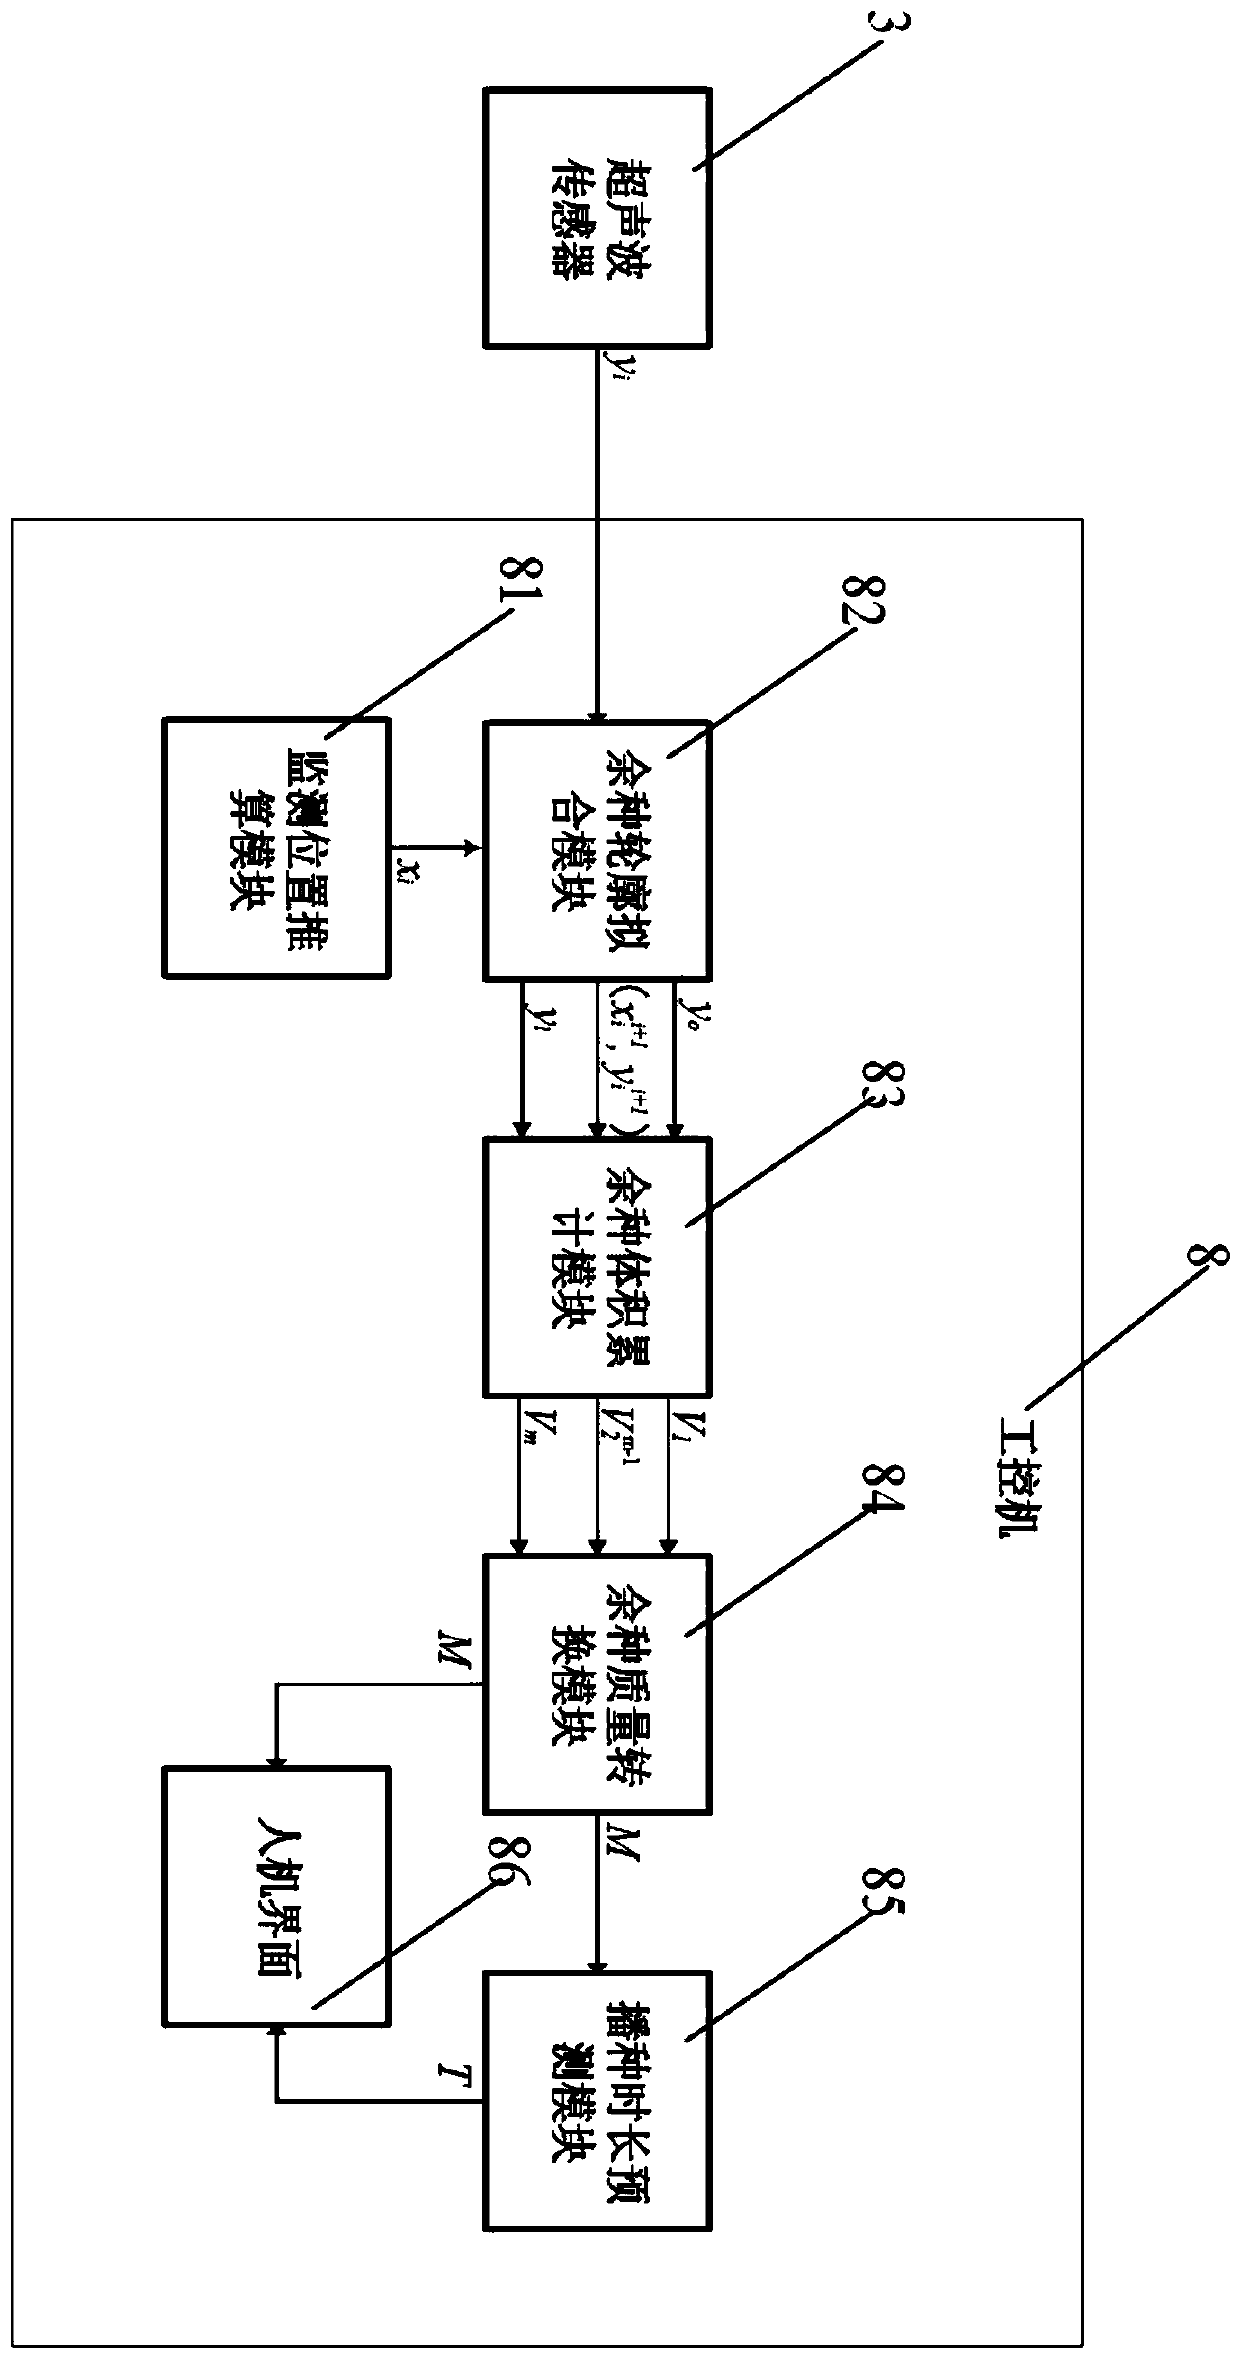 A seed box margin monitoring system and control method